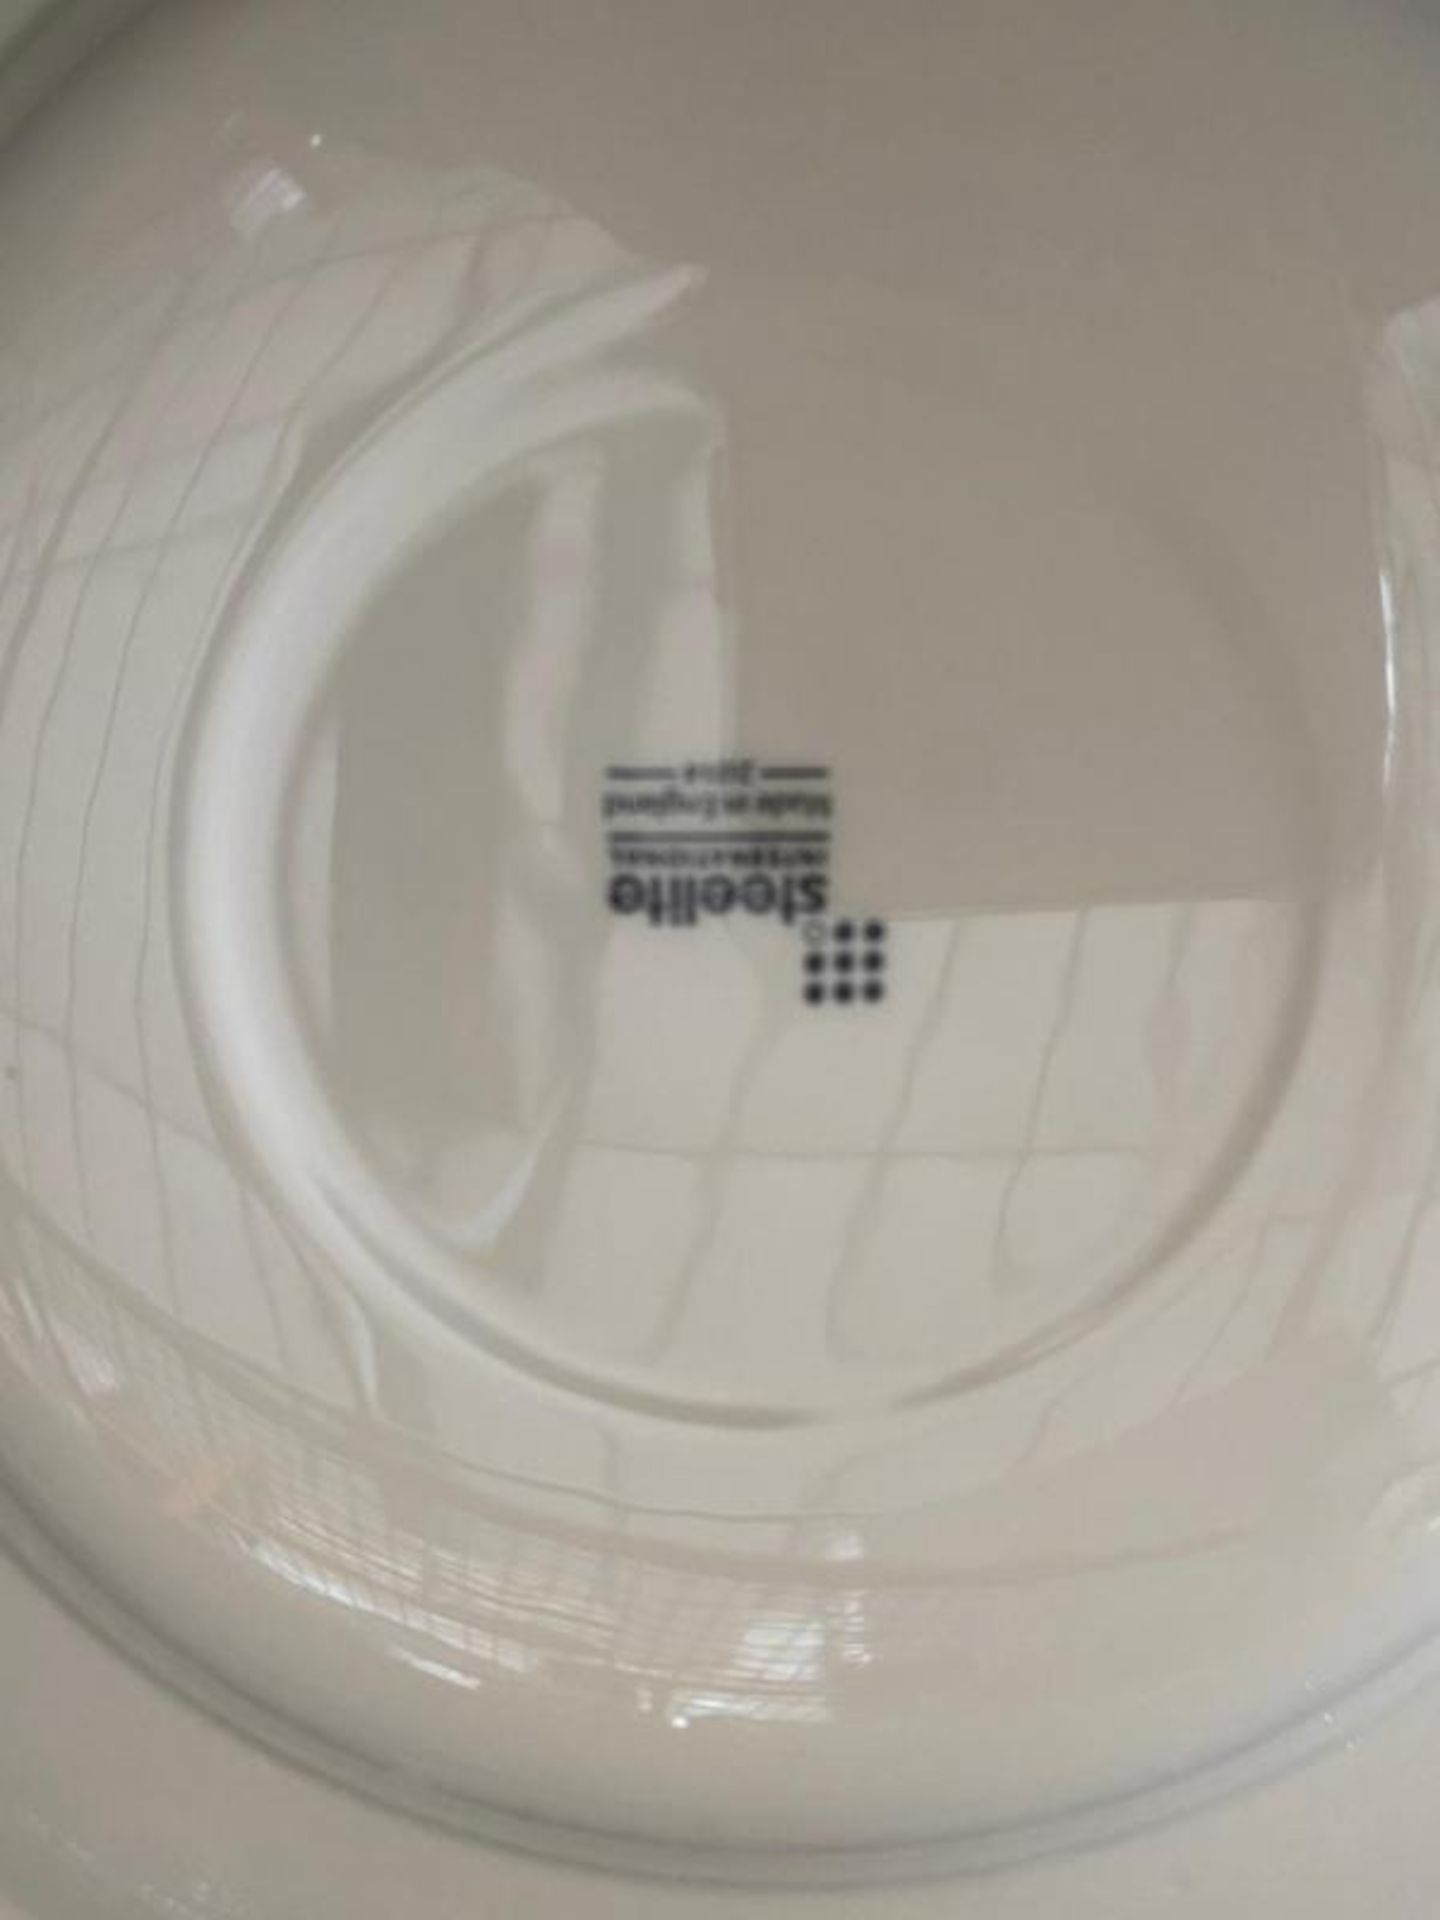 14 x Steelite Simplicity Commercial Oval Plates in White - 342mm - Ref- V0032 - CL011 - 12341 - MC5 - Image 2 of 8